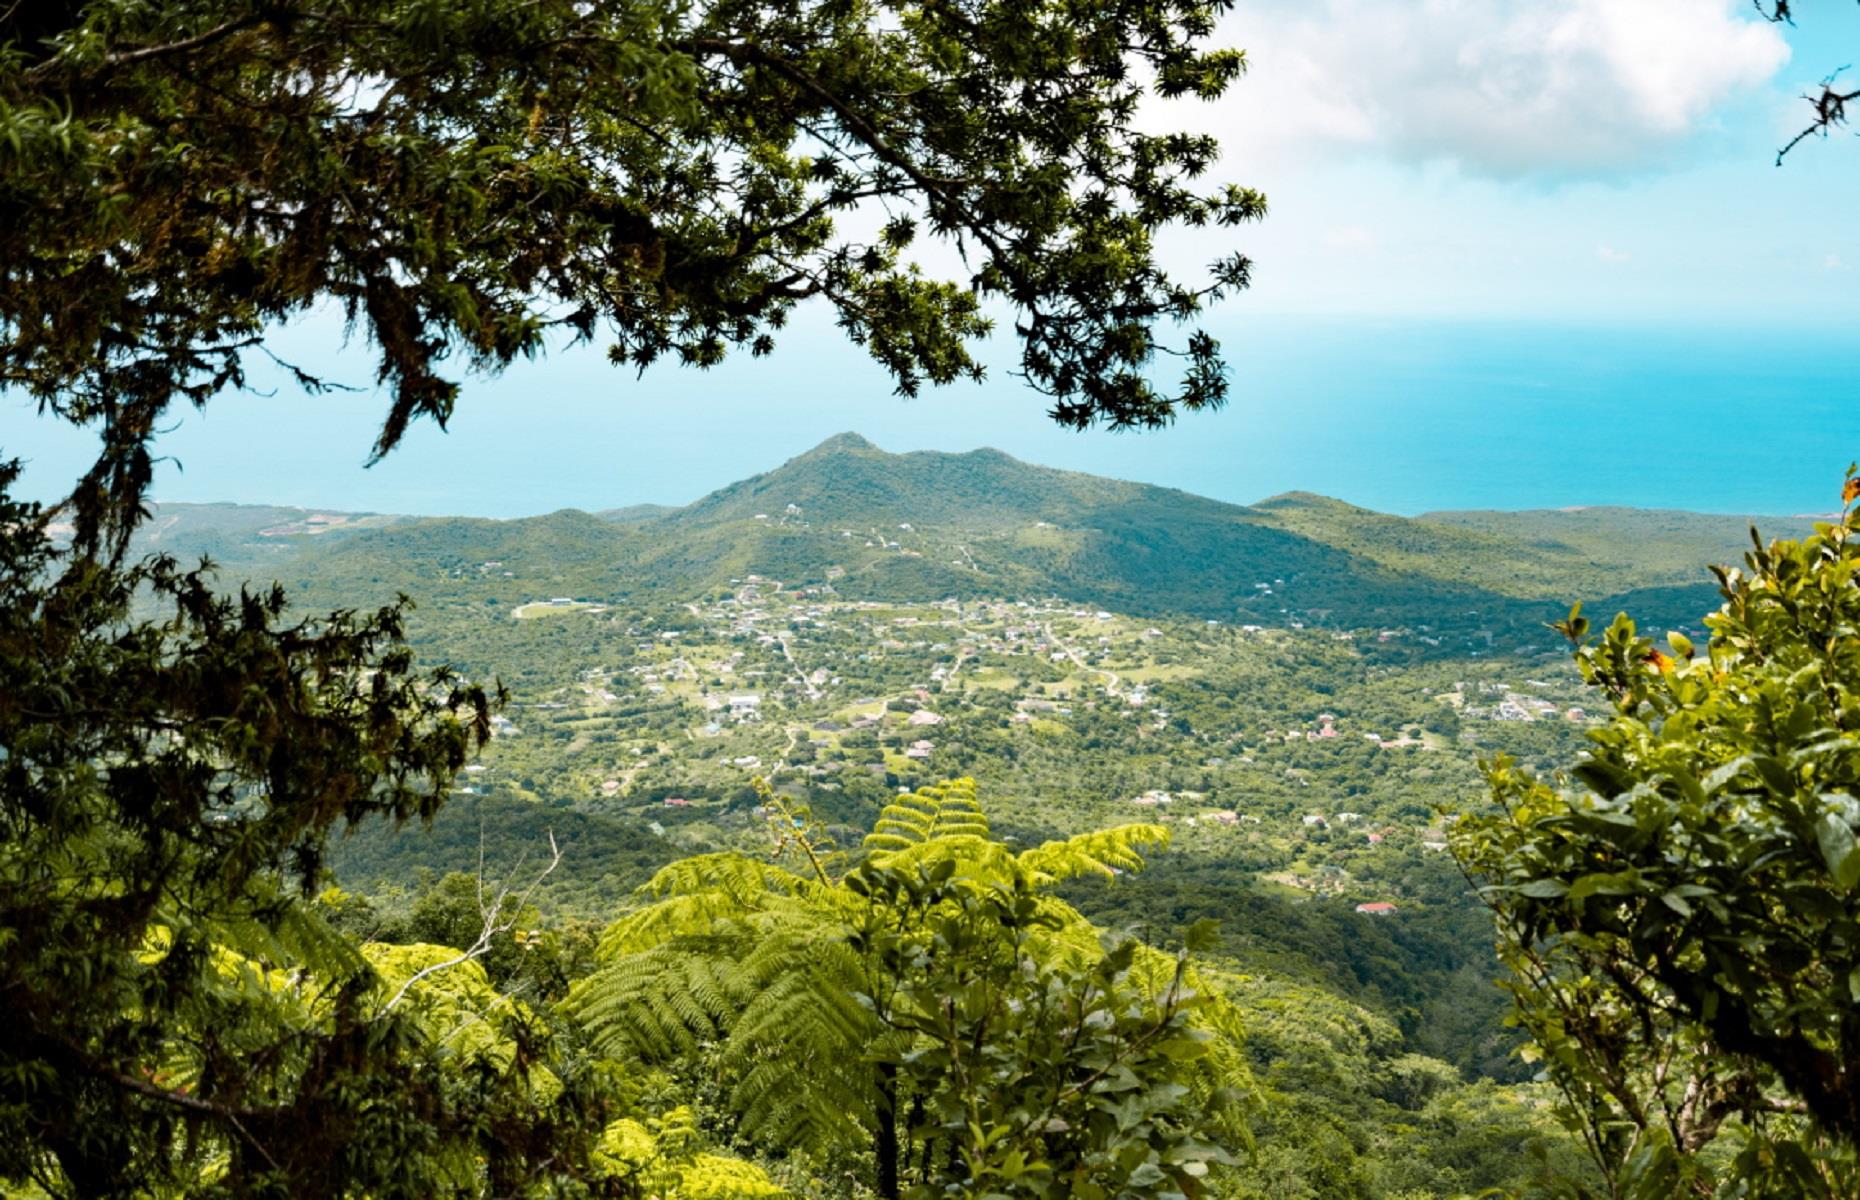 <p>A lack of cruise ships and all-inclusive resorts has ensured that lush little Nevis has retained its old-fashioned Leeward Islands charm. But there's still plenty going on. Here, travelers can partake in everything from horseback riding to yoga retreats, watersports and lavish spas – there are also a wealth of <a href="https://nevisisland.com/nevis-history">historic sites</a> well worth exploring.</p>